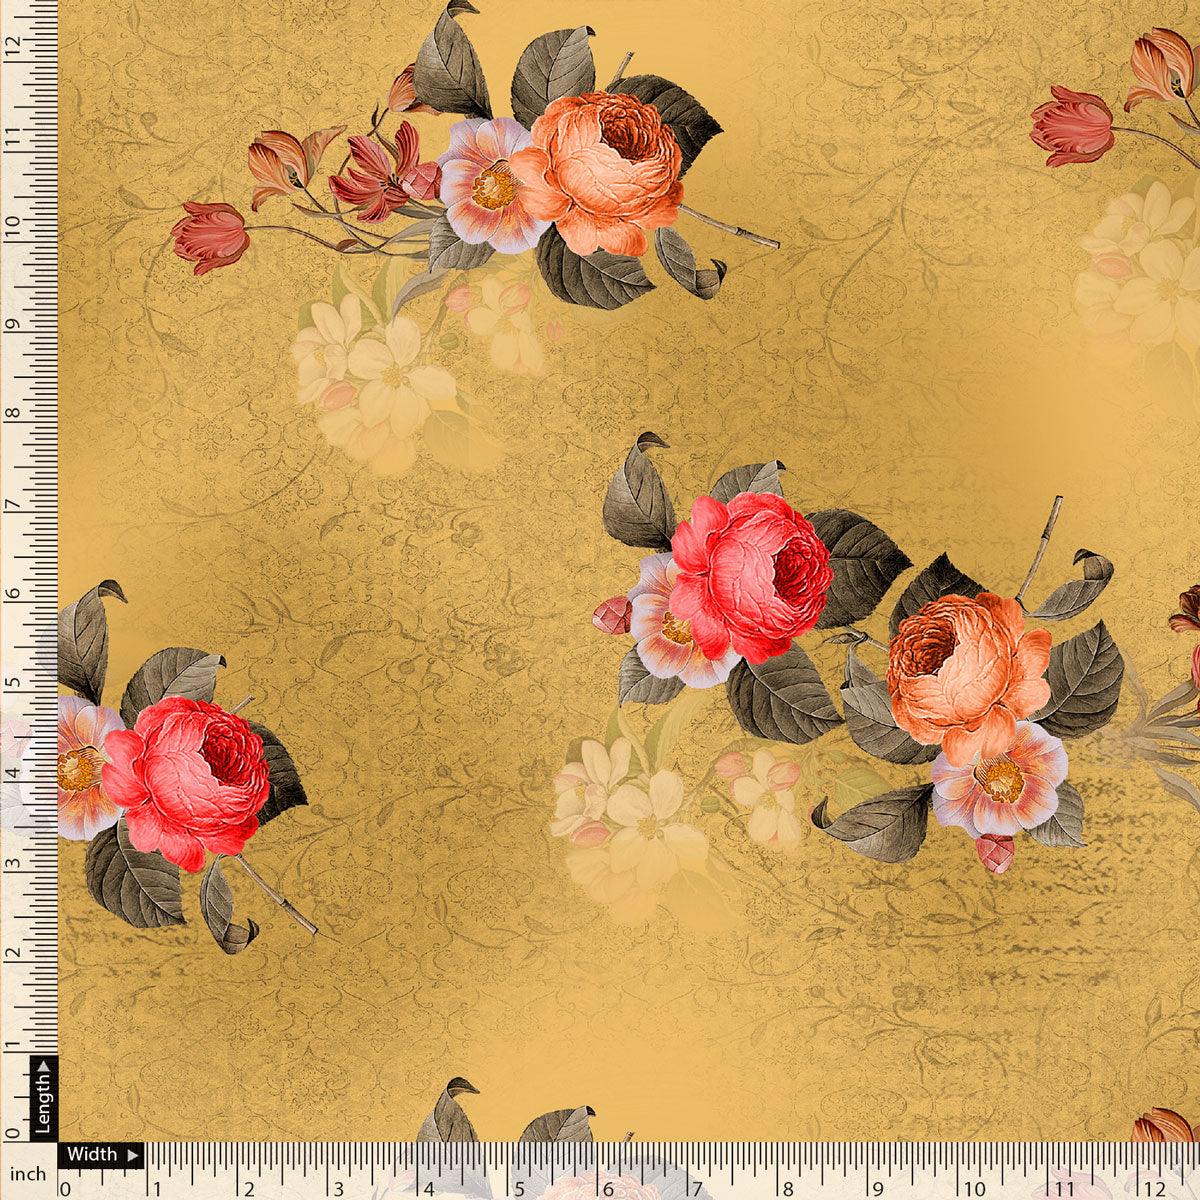 Golden Flower Printed Pure Georgette Fabric Material - FAB VOGUE Studio®